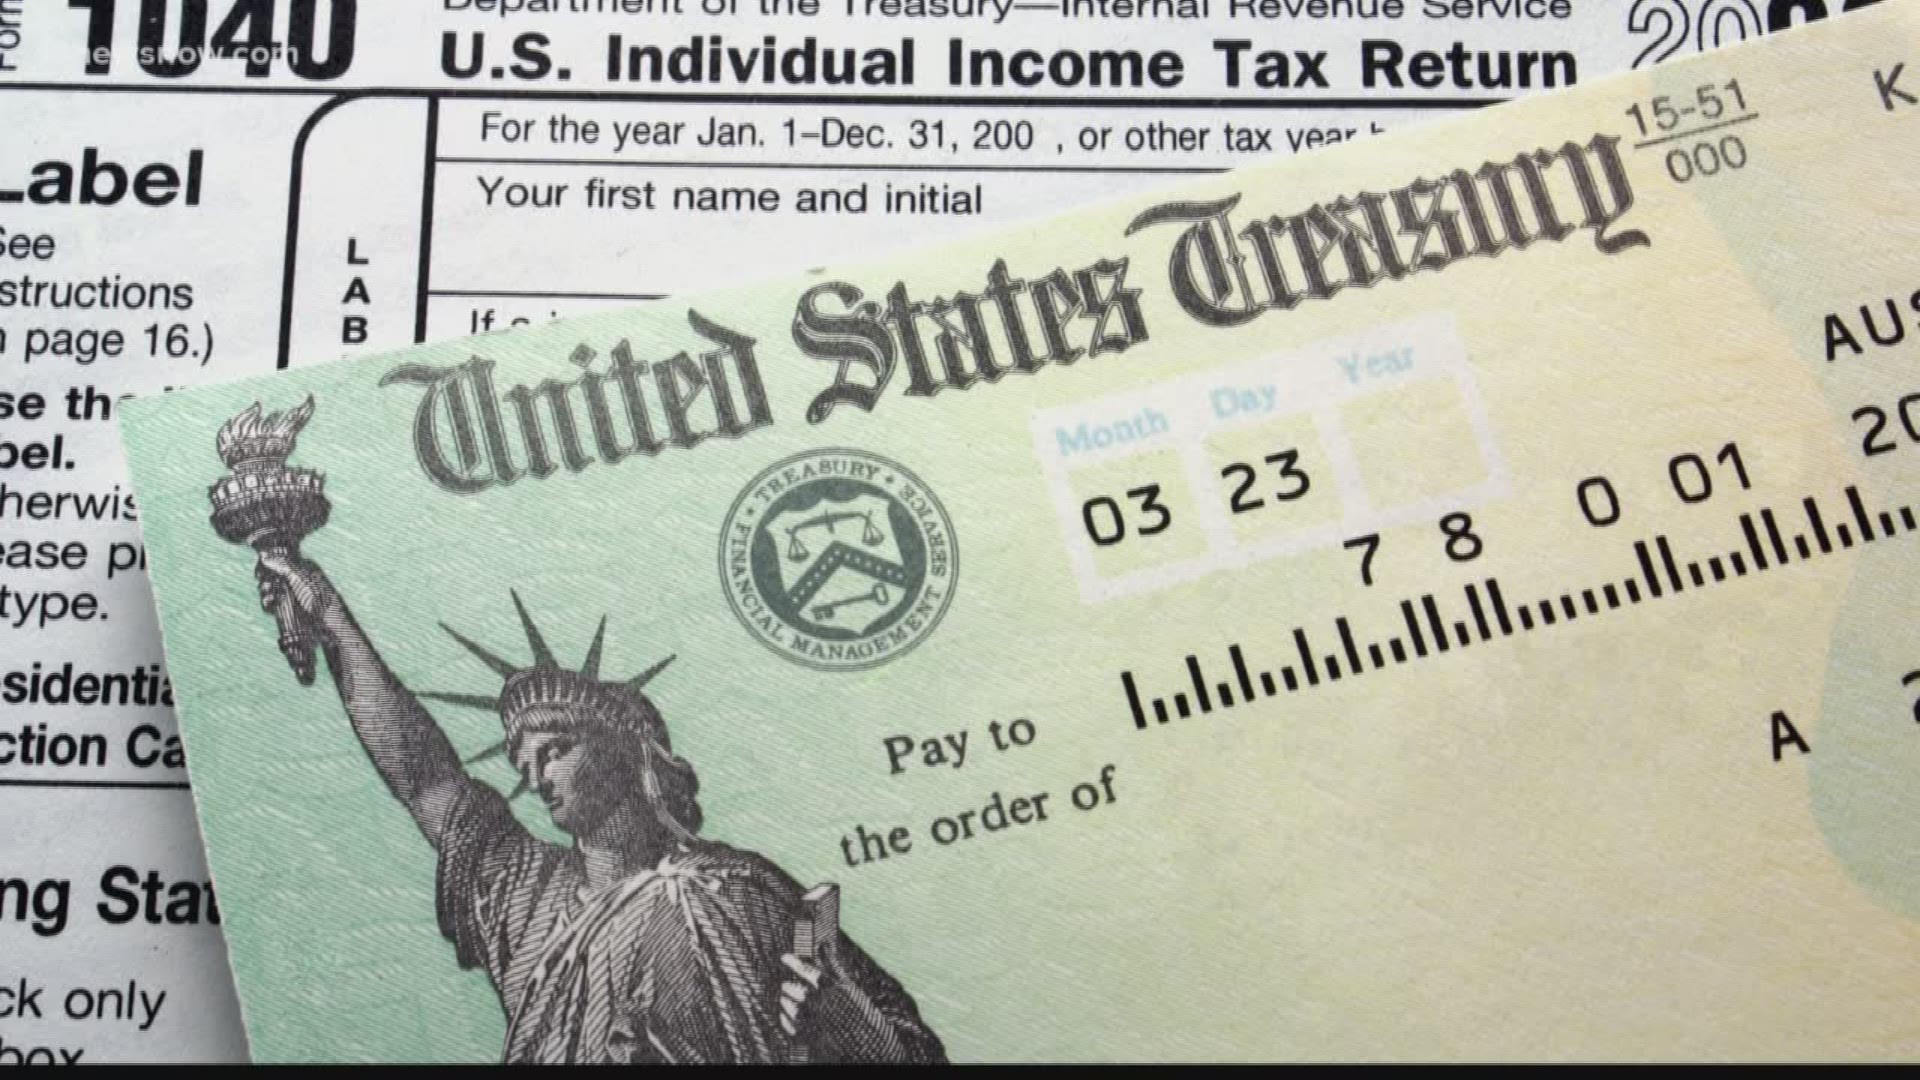 With the IRS furloughed during the government shutdown, income tax refund checks could be delayed.